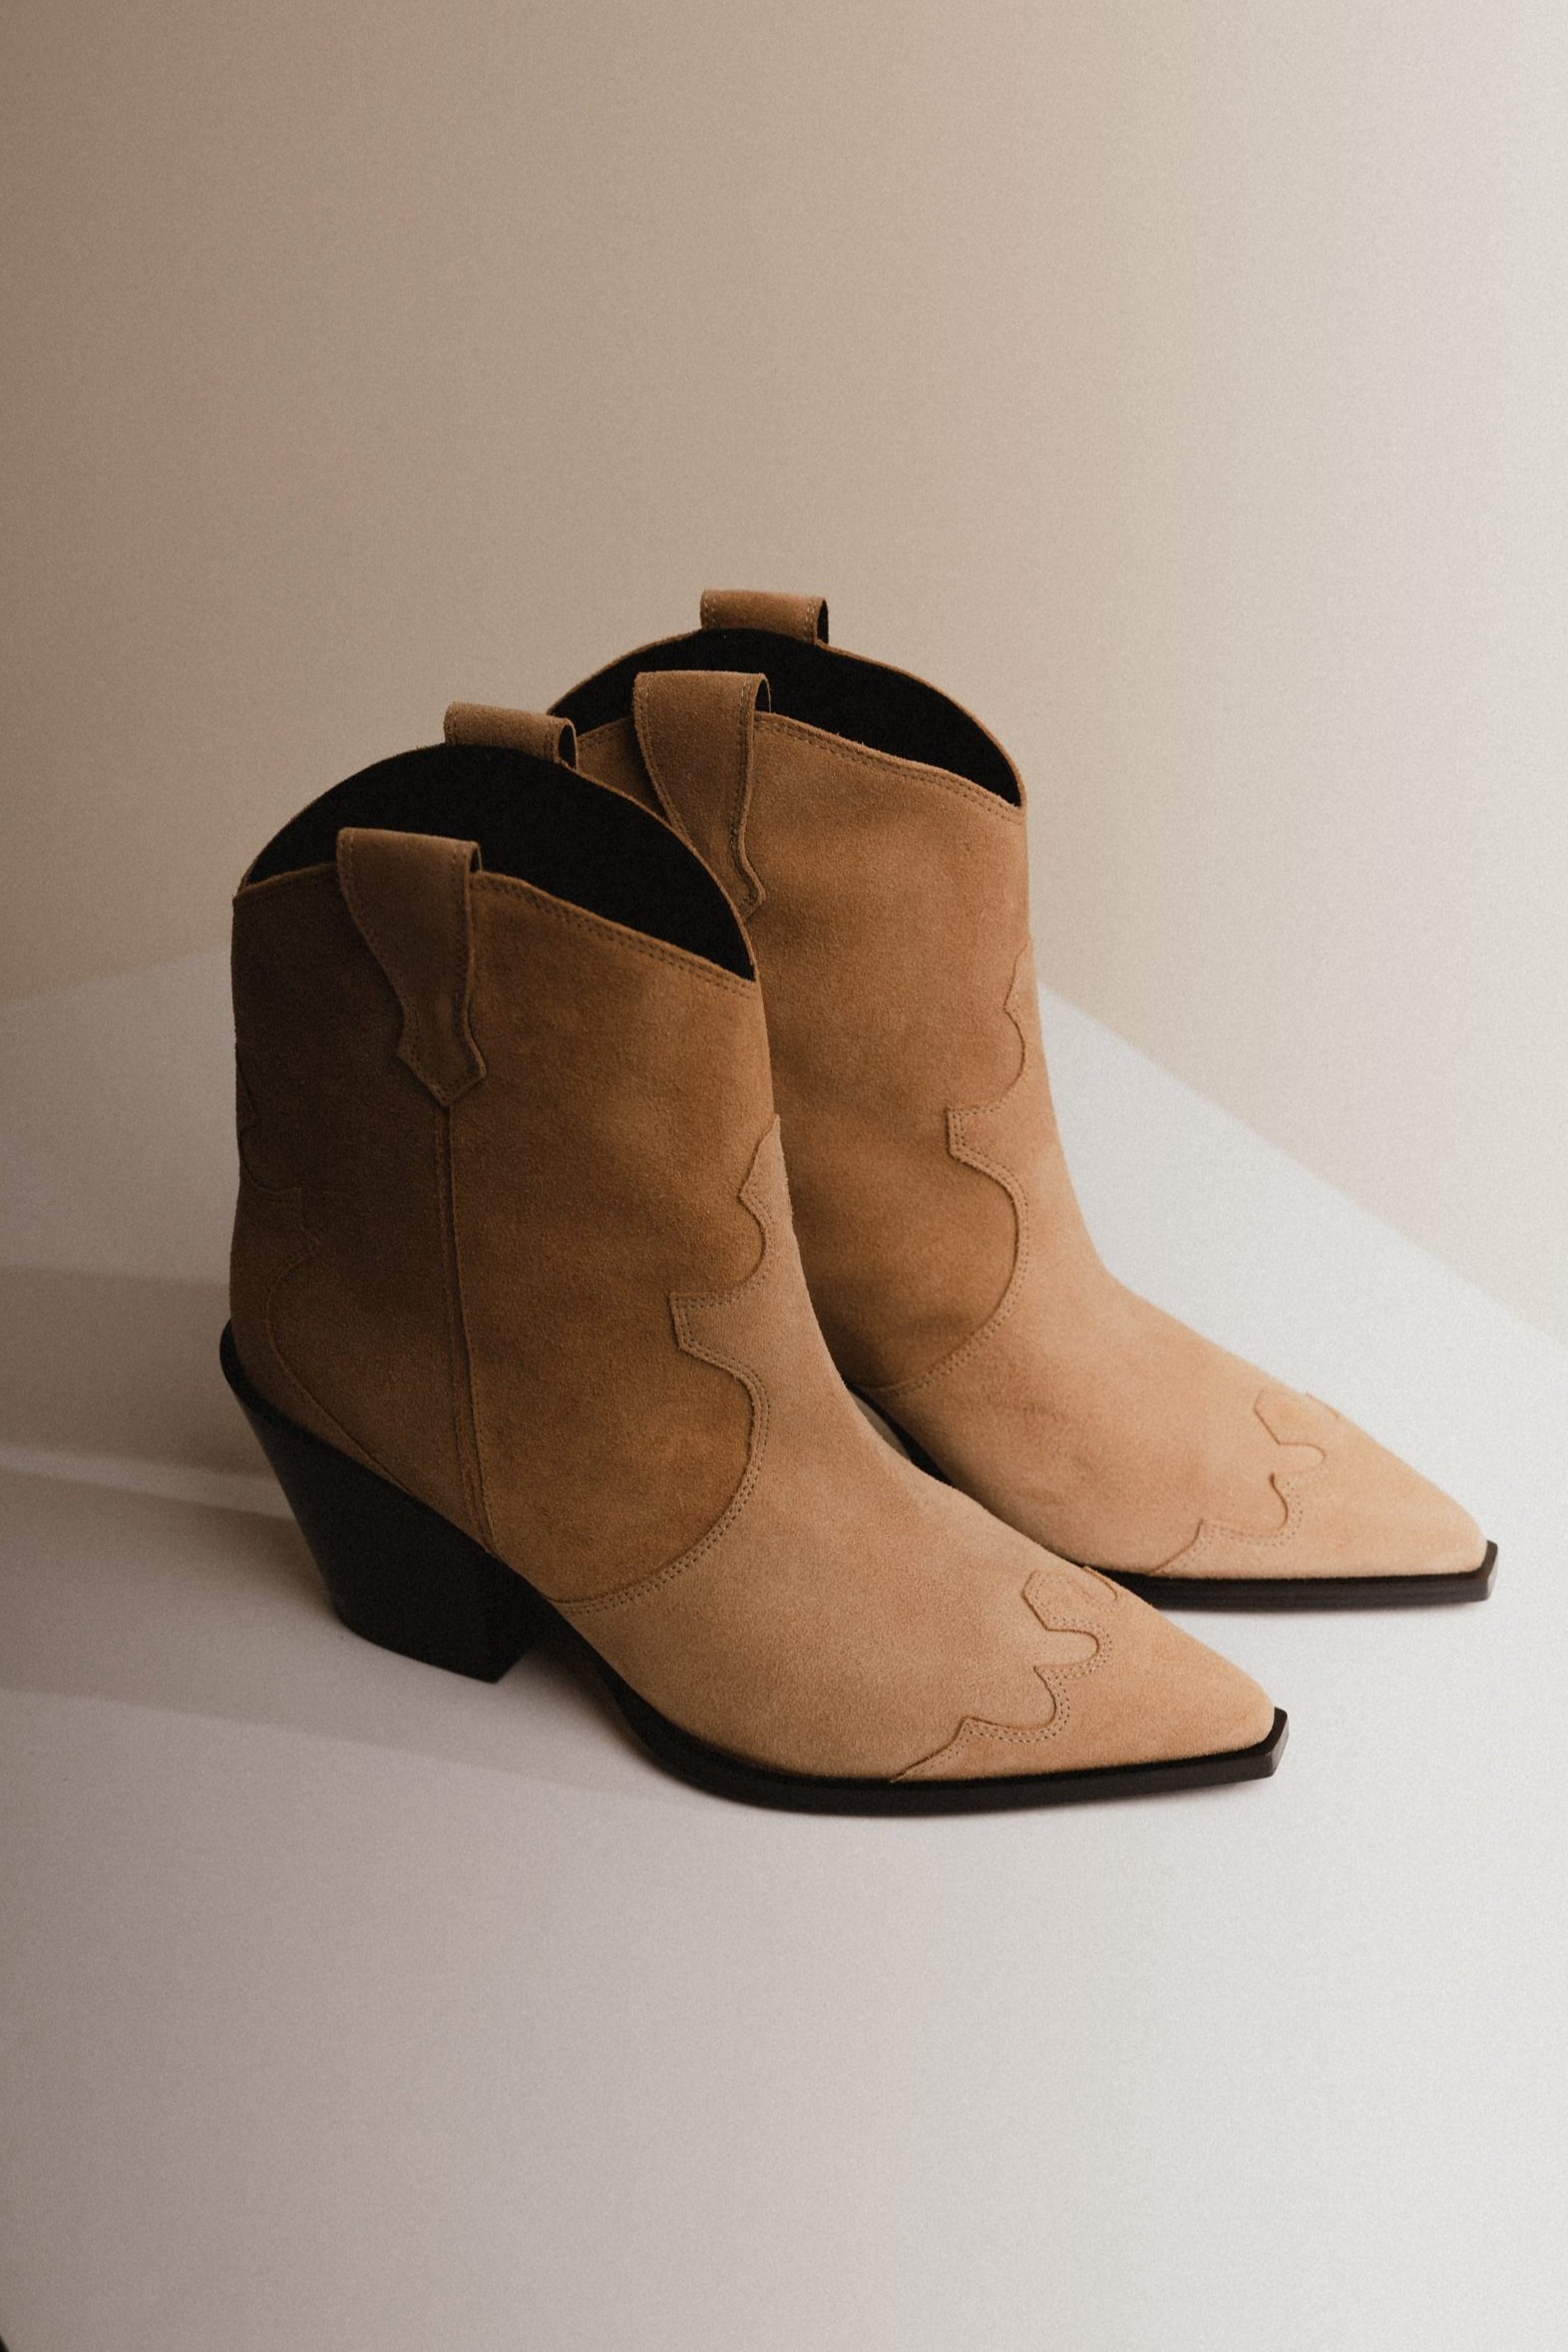  Best western style boots to shop this summer. Best Summer Sale. Best Off Season Sale. AEYDE Western Boots In Caramel. Cowboy style boots. Cowgirl style boots.  